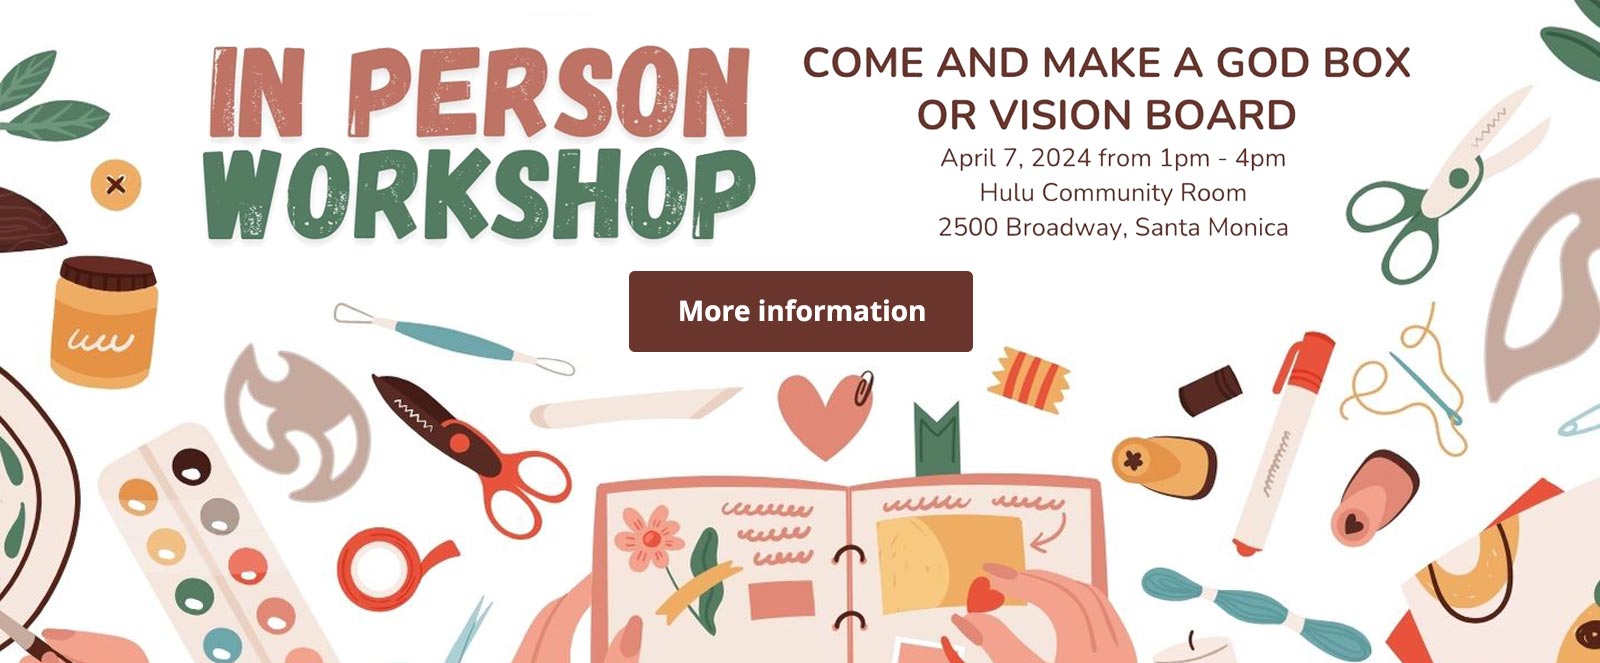 In Person Workshop - come and make a God box or vision board